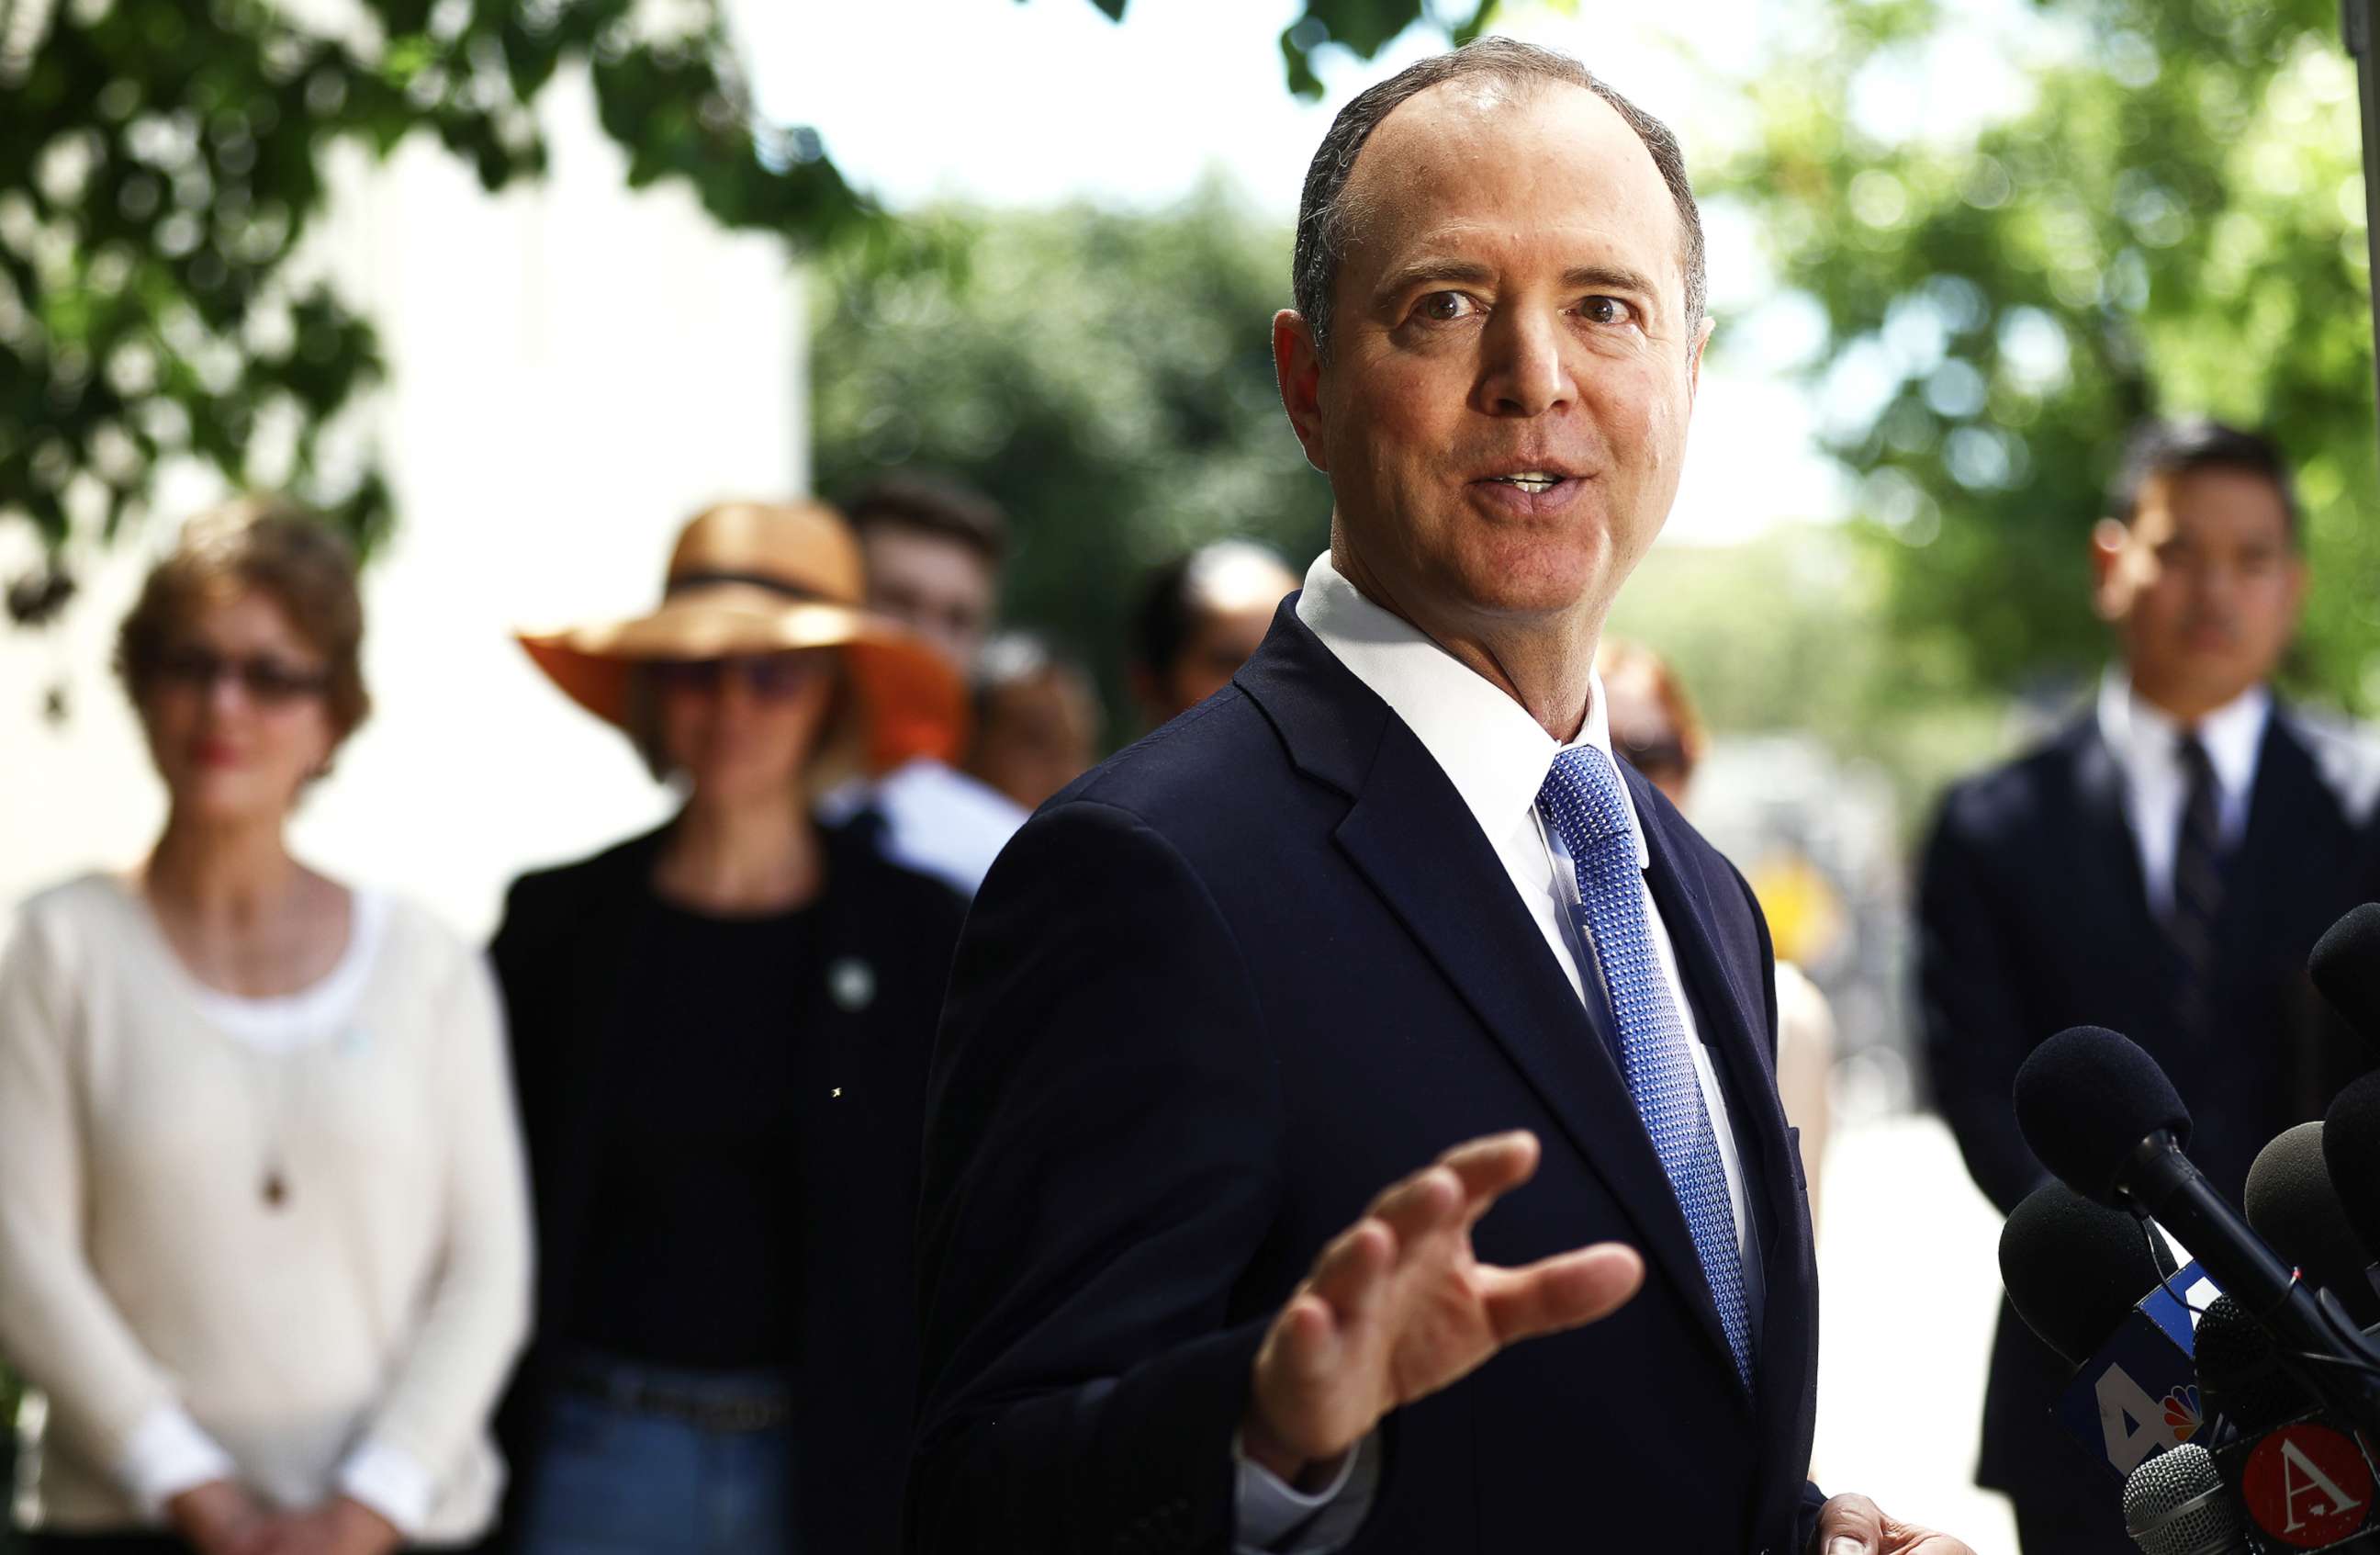 PHOTO: Chairman of the House Intelligence Committee Adam Schiff speaks at a press conference discussing release of the redacted Mueller report on April 18, 2019 in Burbank, Calif.